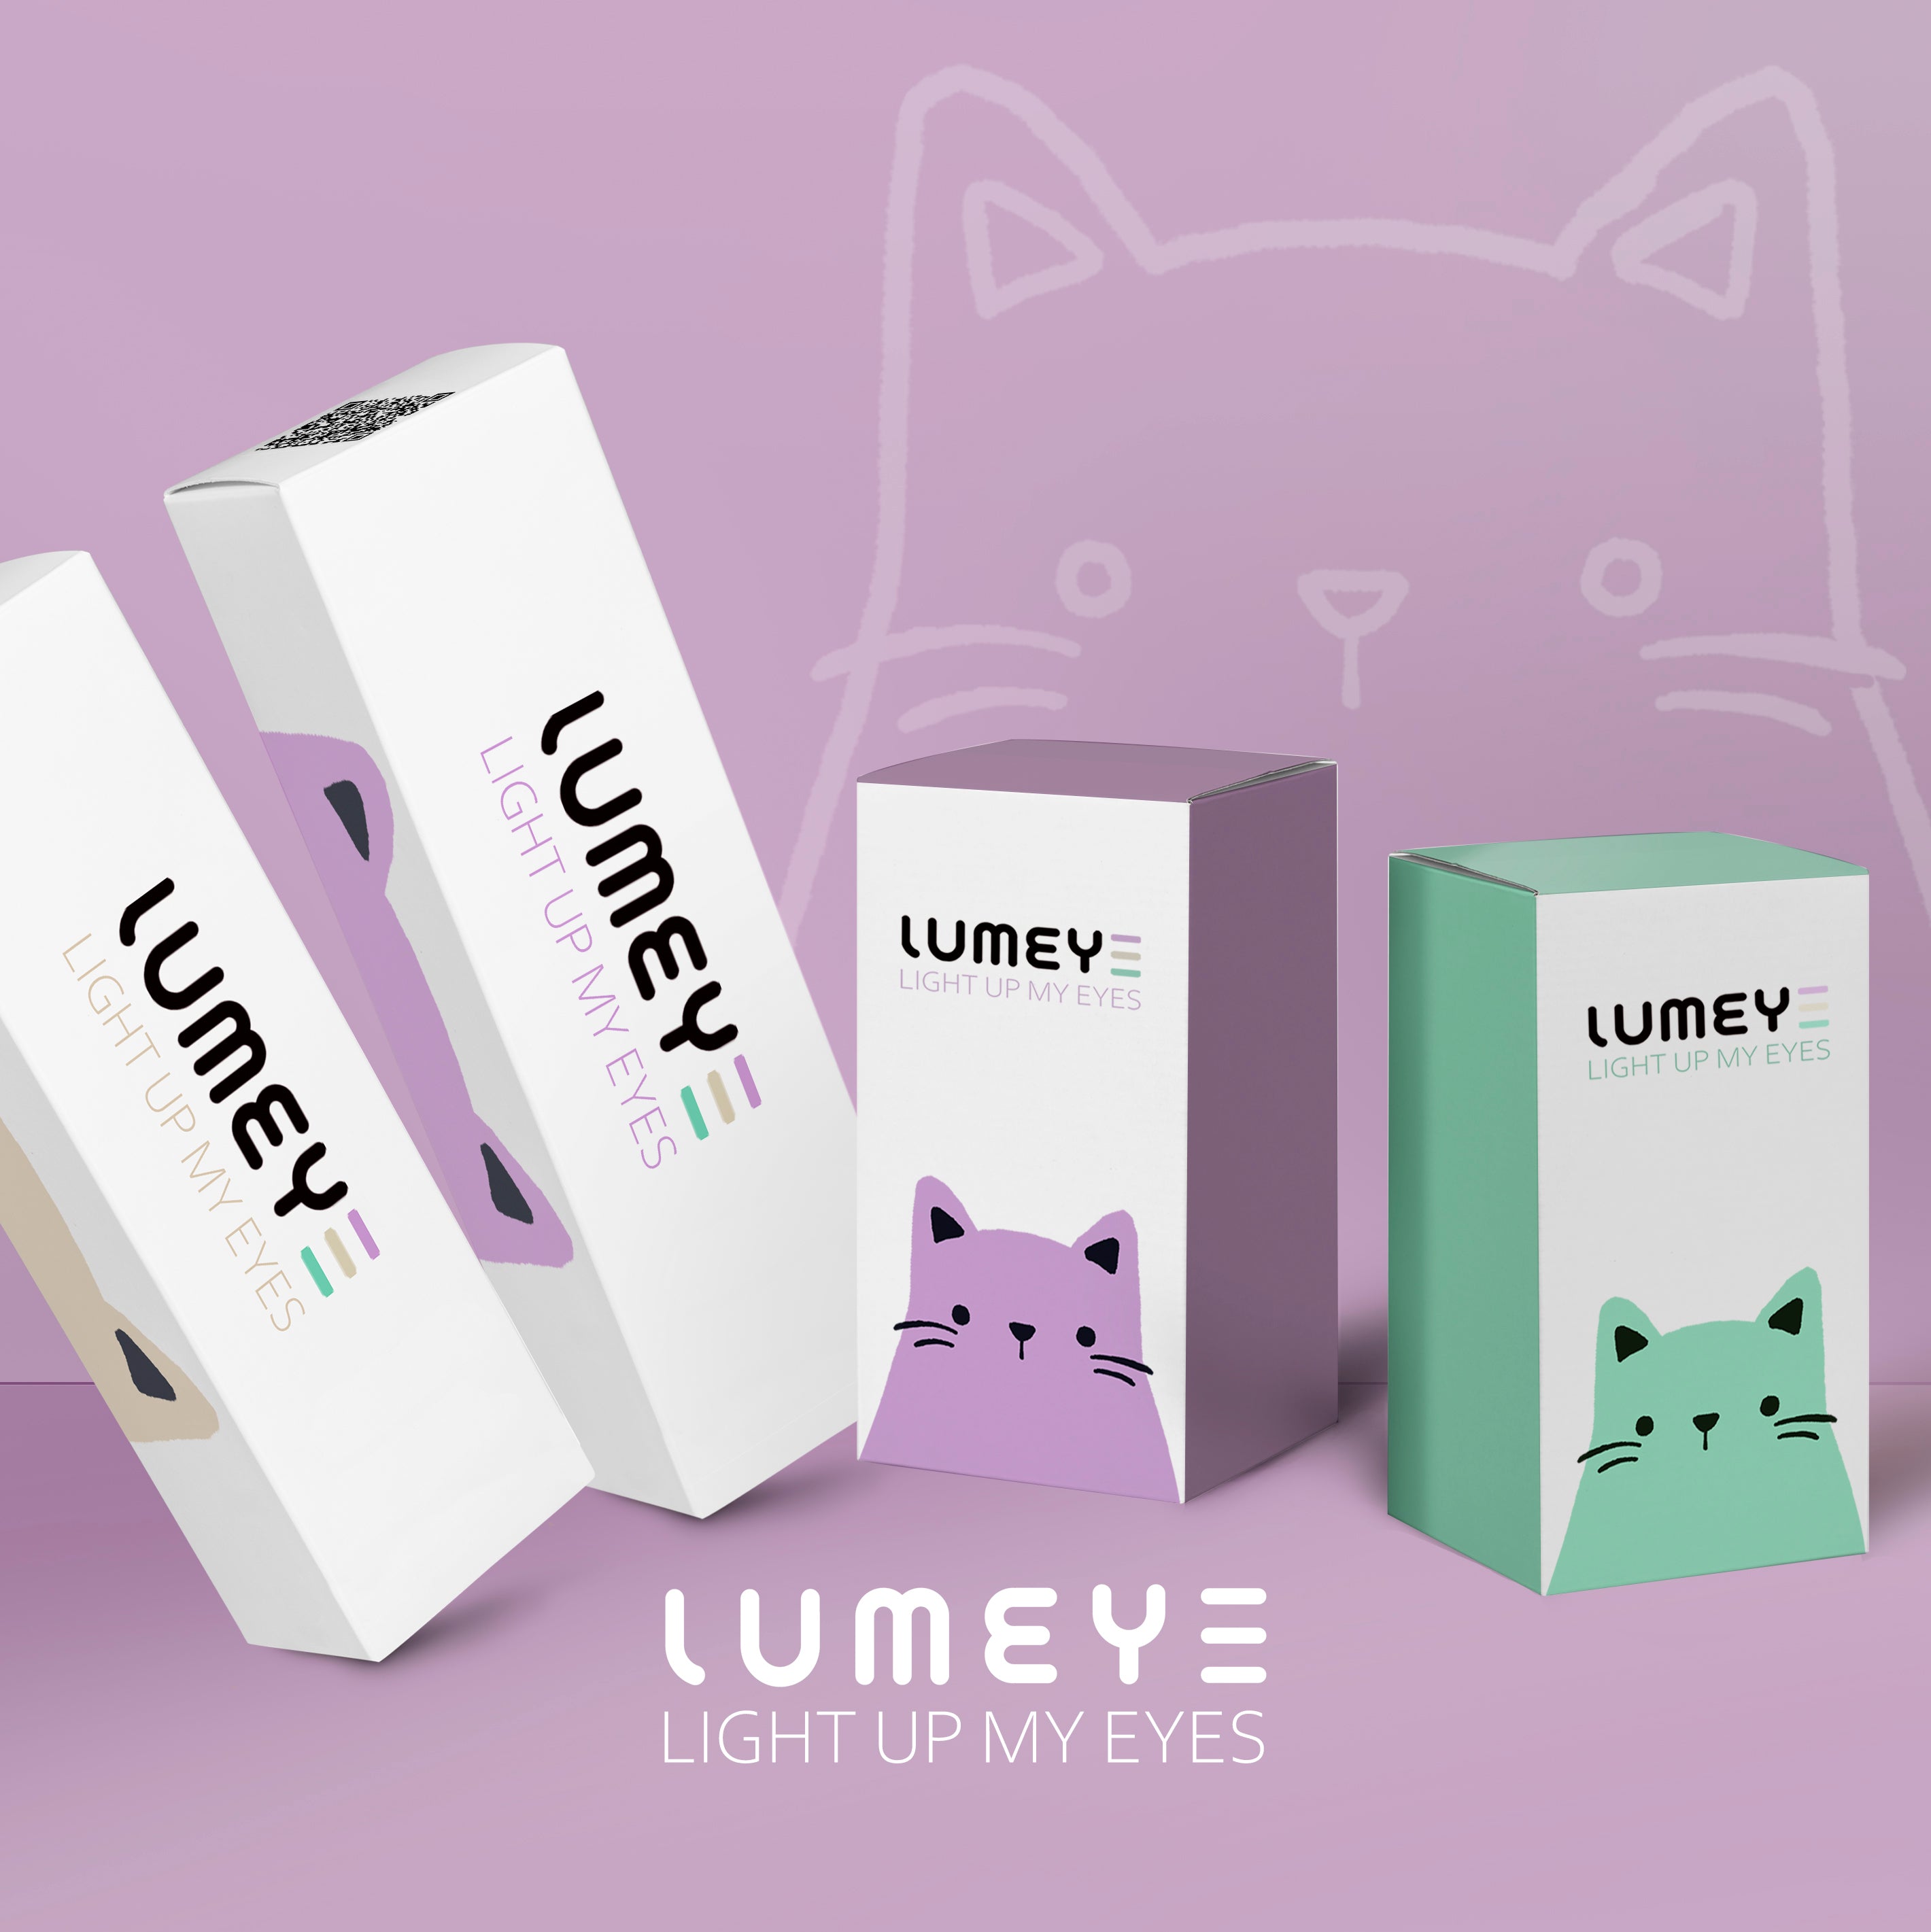 Best COLORED CONTACTS - LUMEYE Dune Brown Colored Contact Lenses - LUMEYE